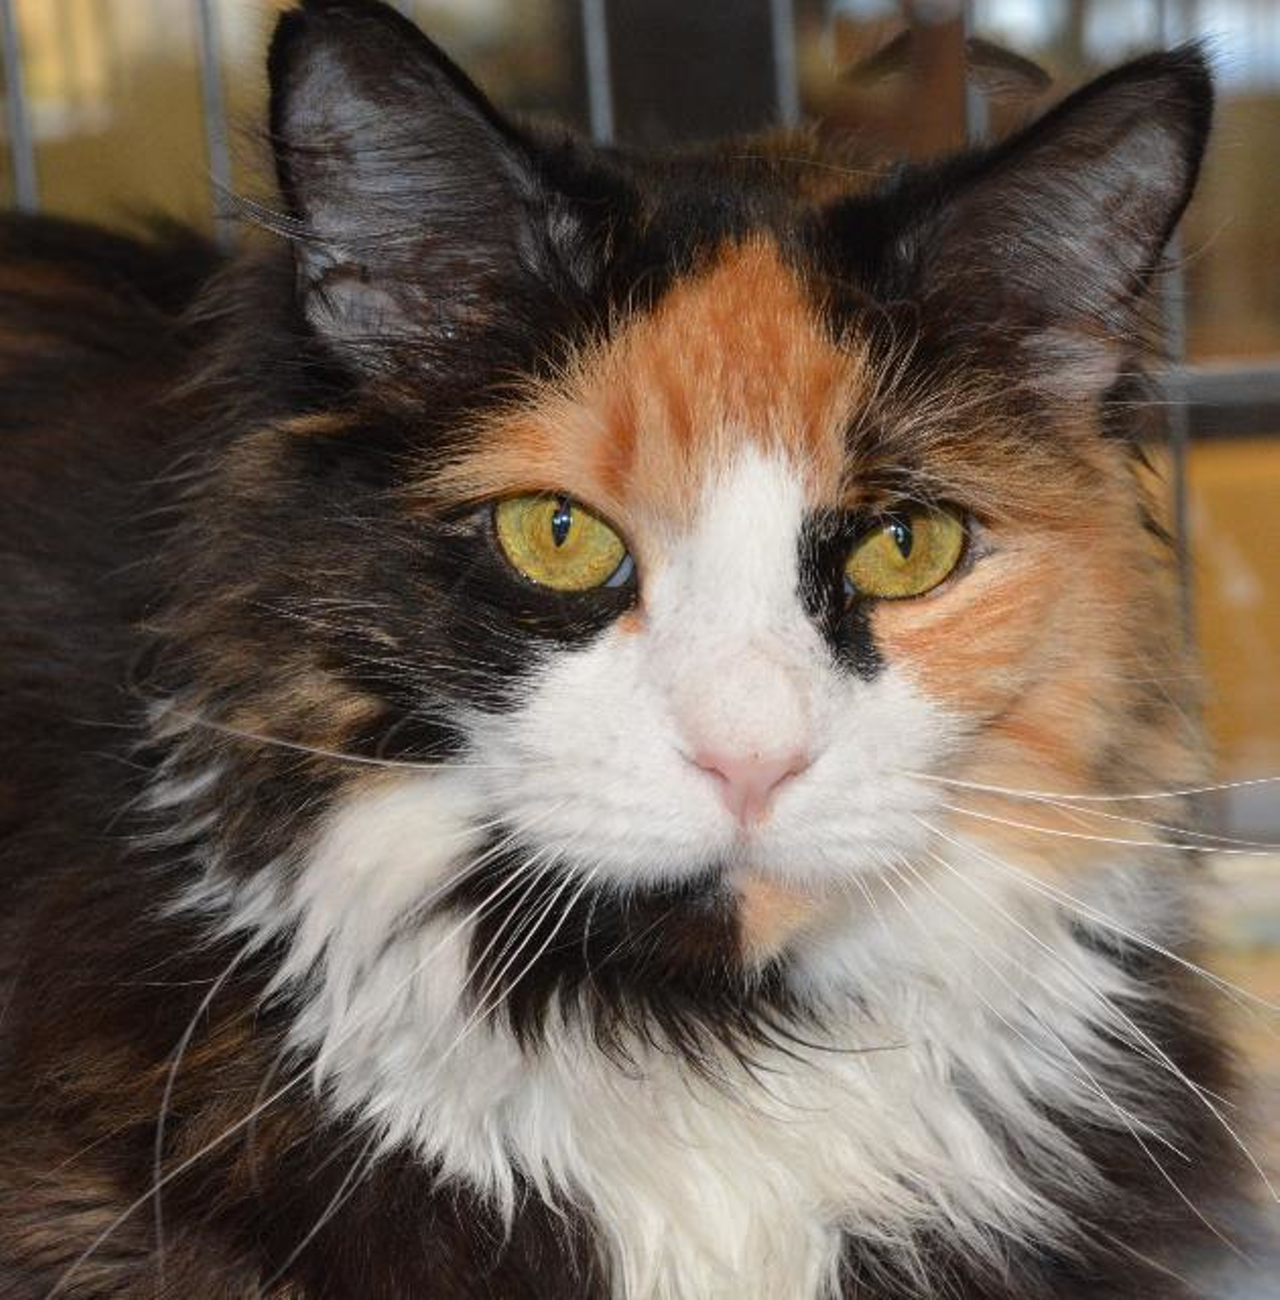 Name: Catalina Goby | Breed: Domestic Long Hair | Age: 8 years old | Sex: Female | Rescue: OAR